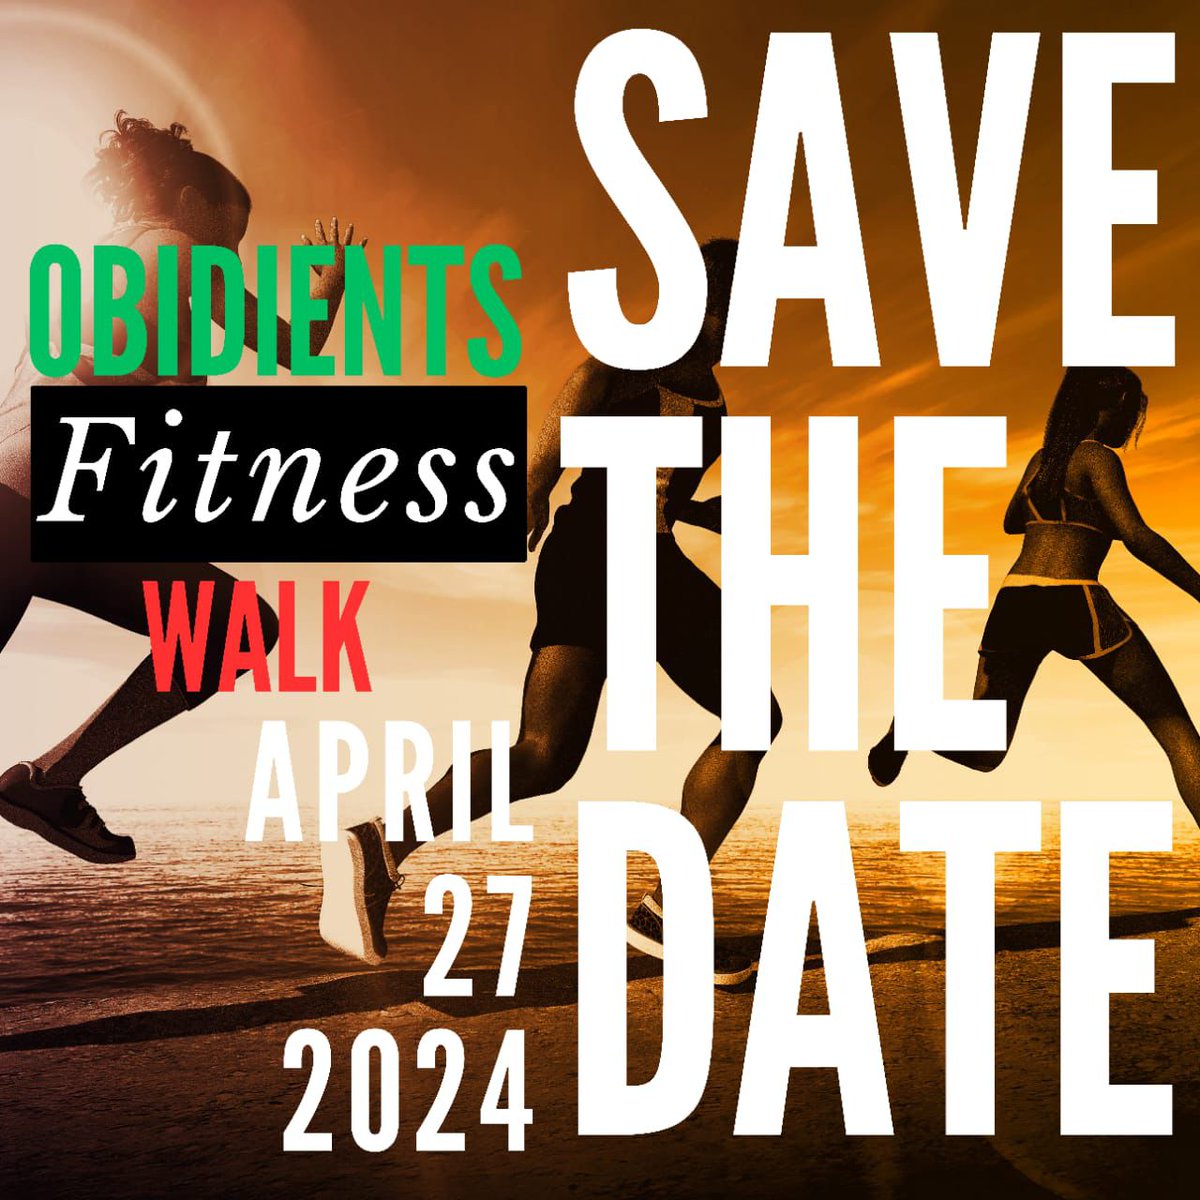 Edo state Obidient fitness walk with OUR GUY Olumide Akpata is gonna be Lit...🔥 Don't miss this one for anything. #EDO2024.